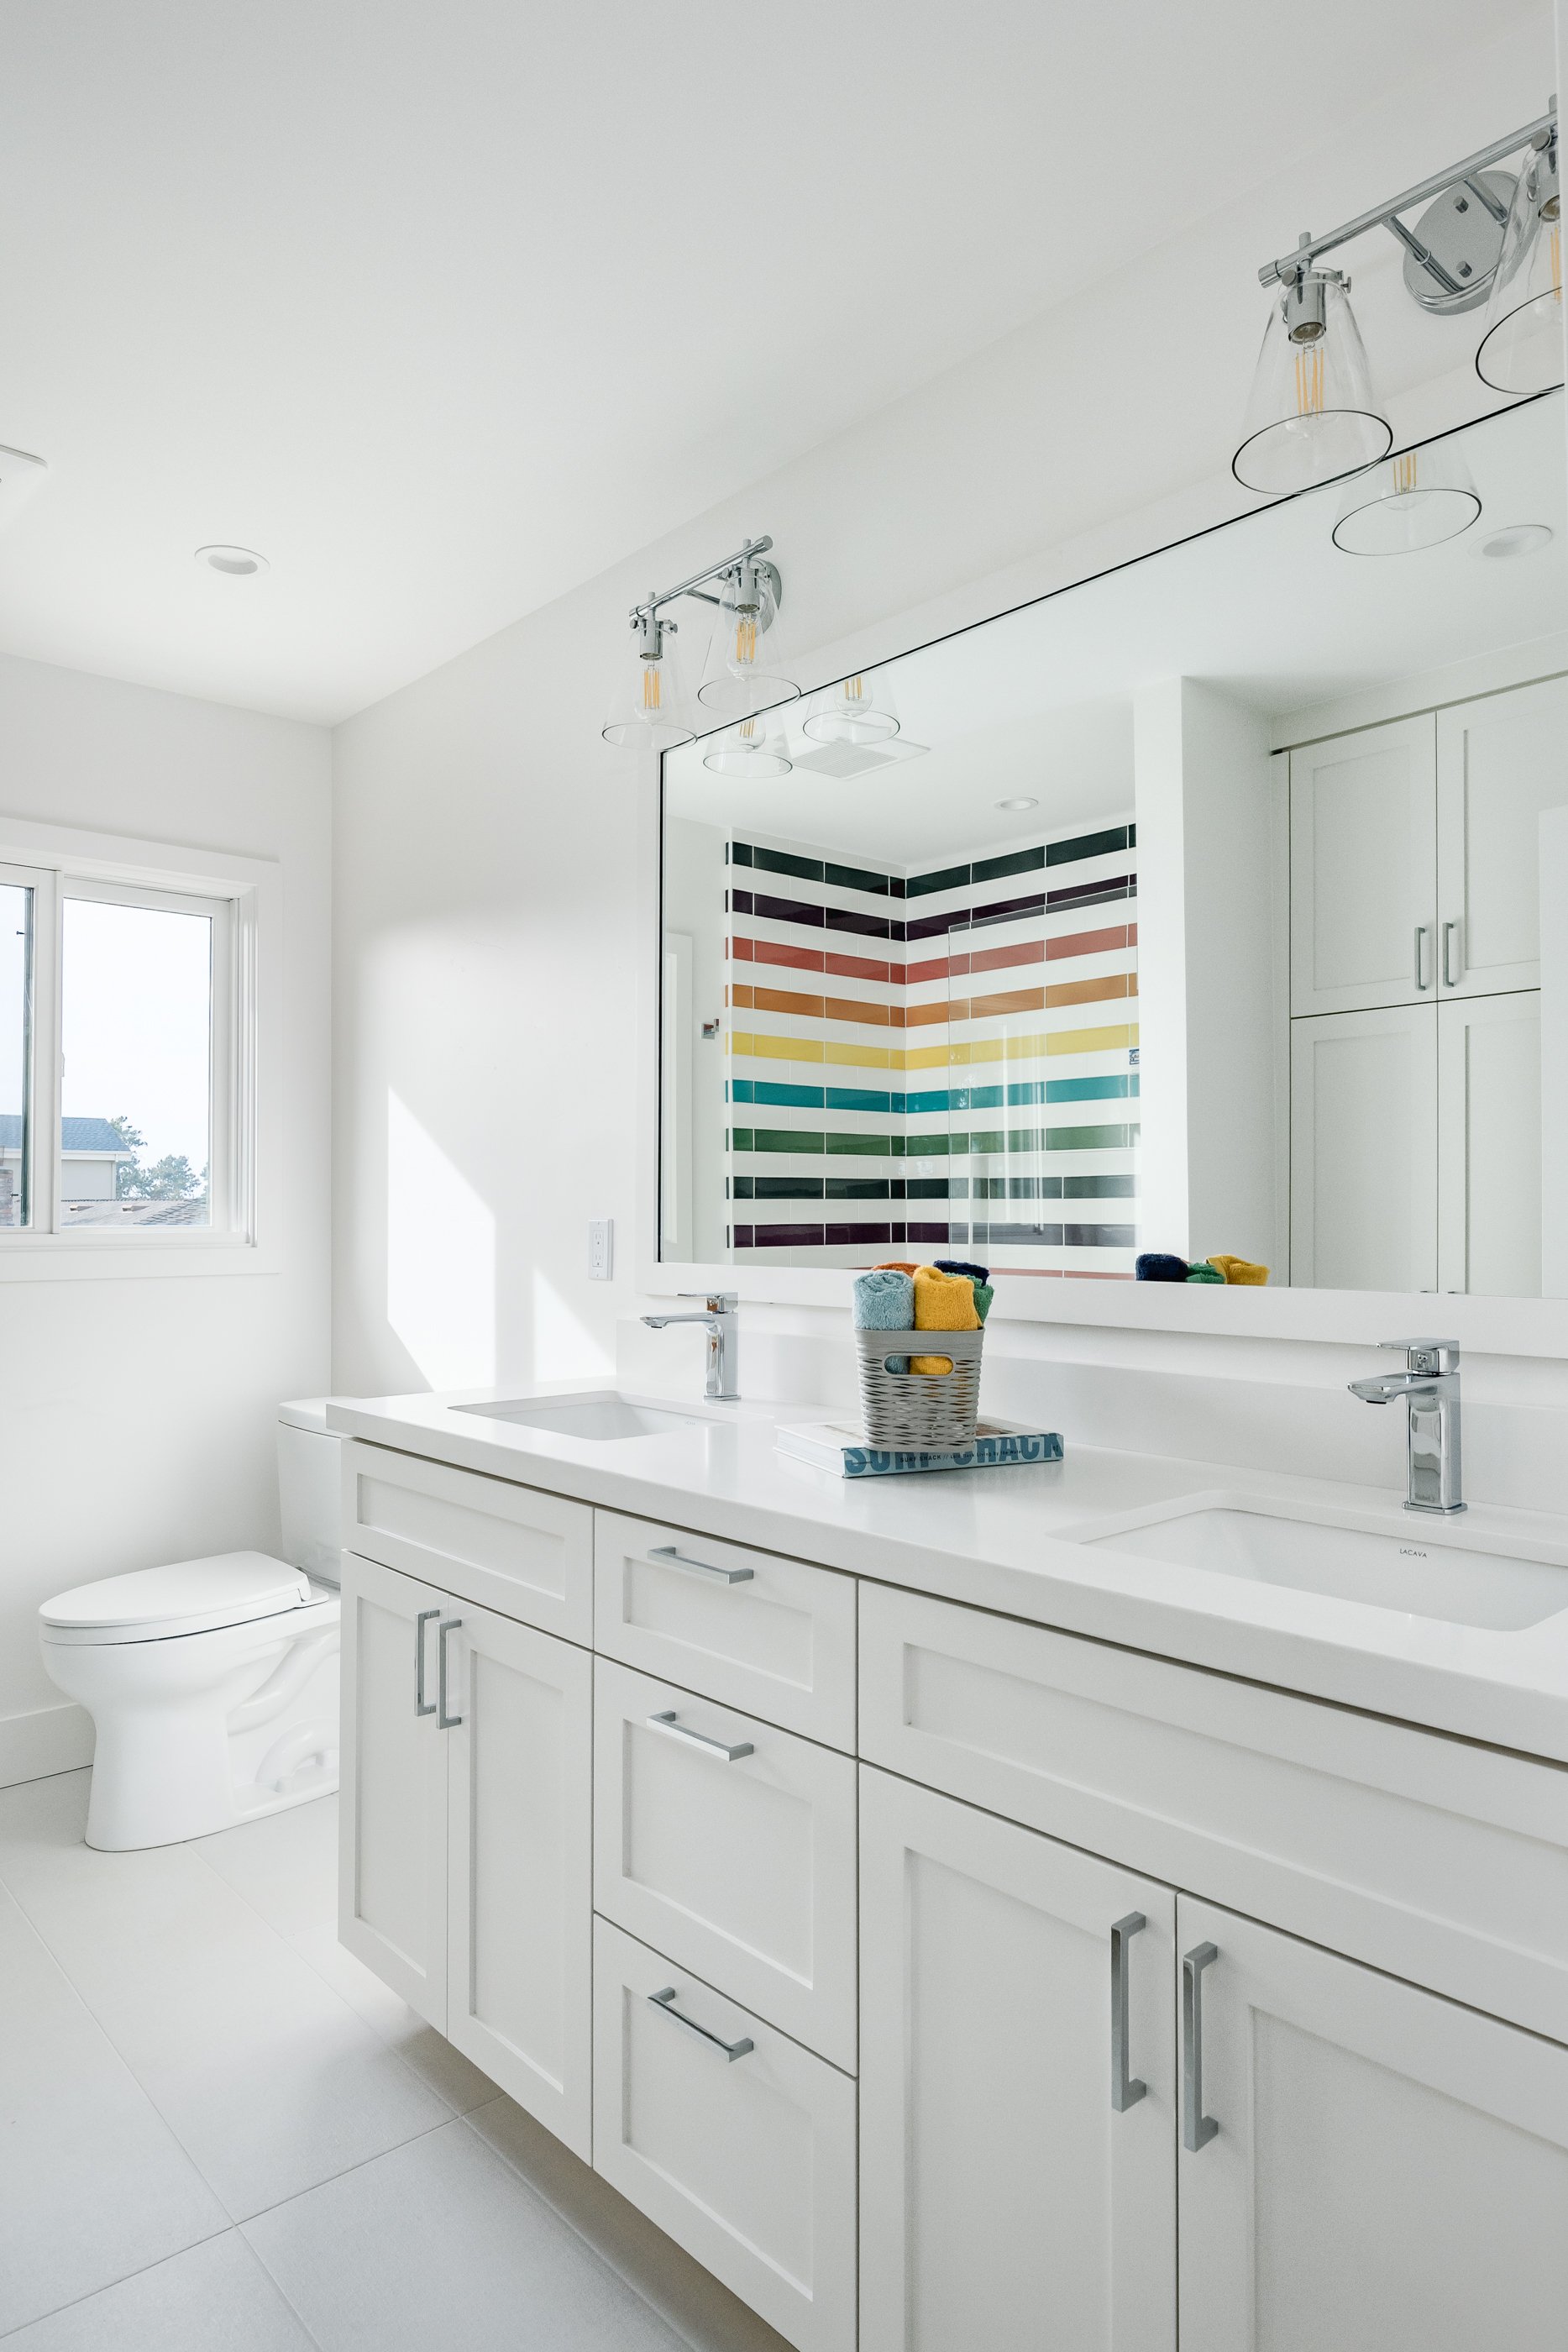 Natural light and color theory make this bathroom pop!